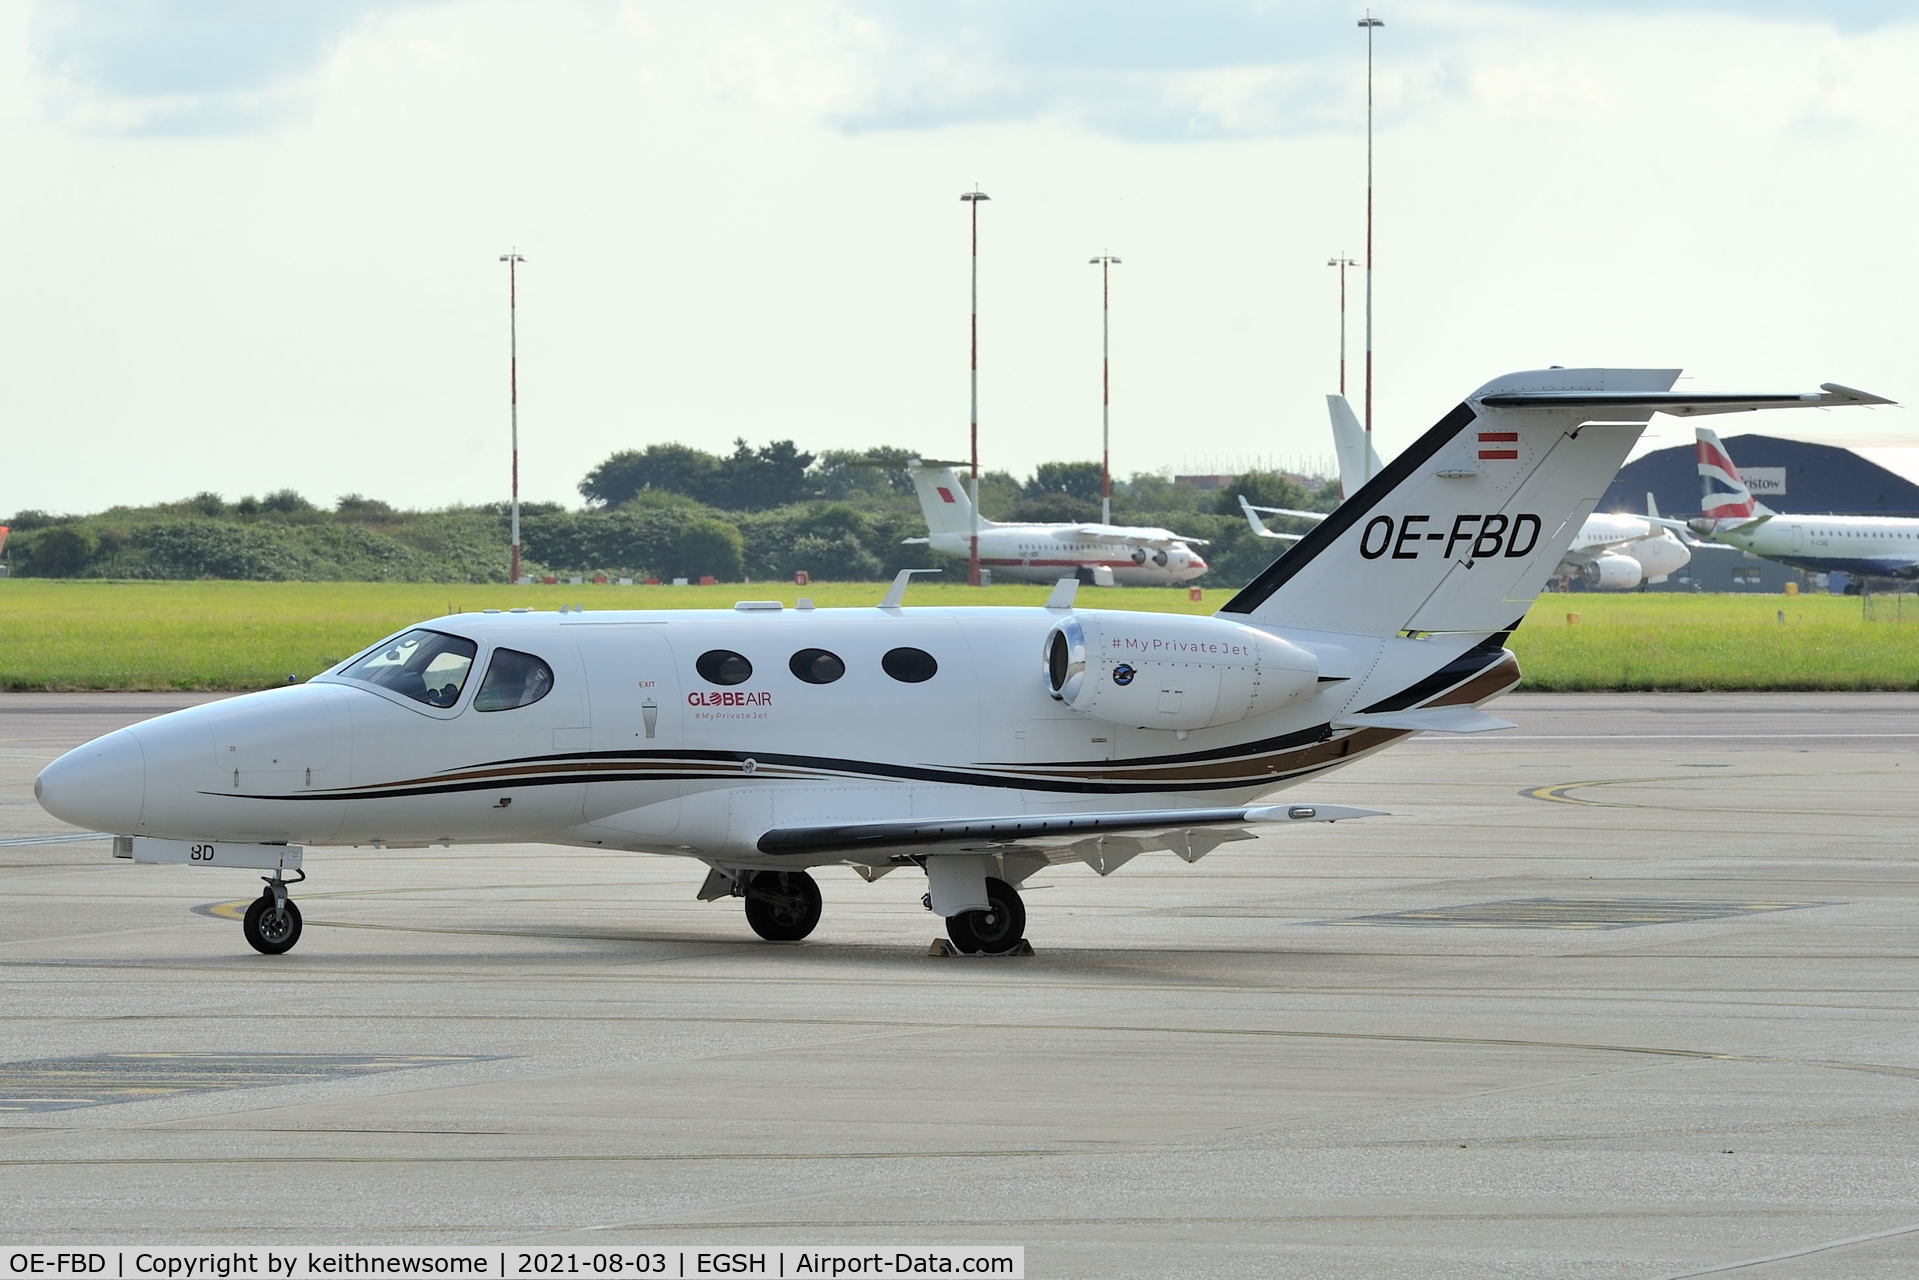 OE-FBD, 2010 Cessna 510 Citation Mustang Citation Mustang C/N 510-0303, Arrived at Norwich from Basel / Mulhouse.